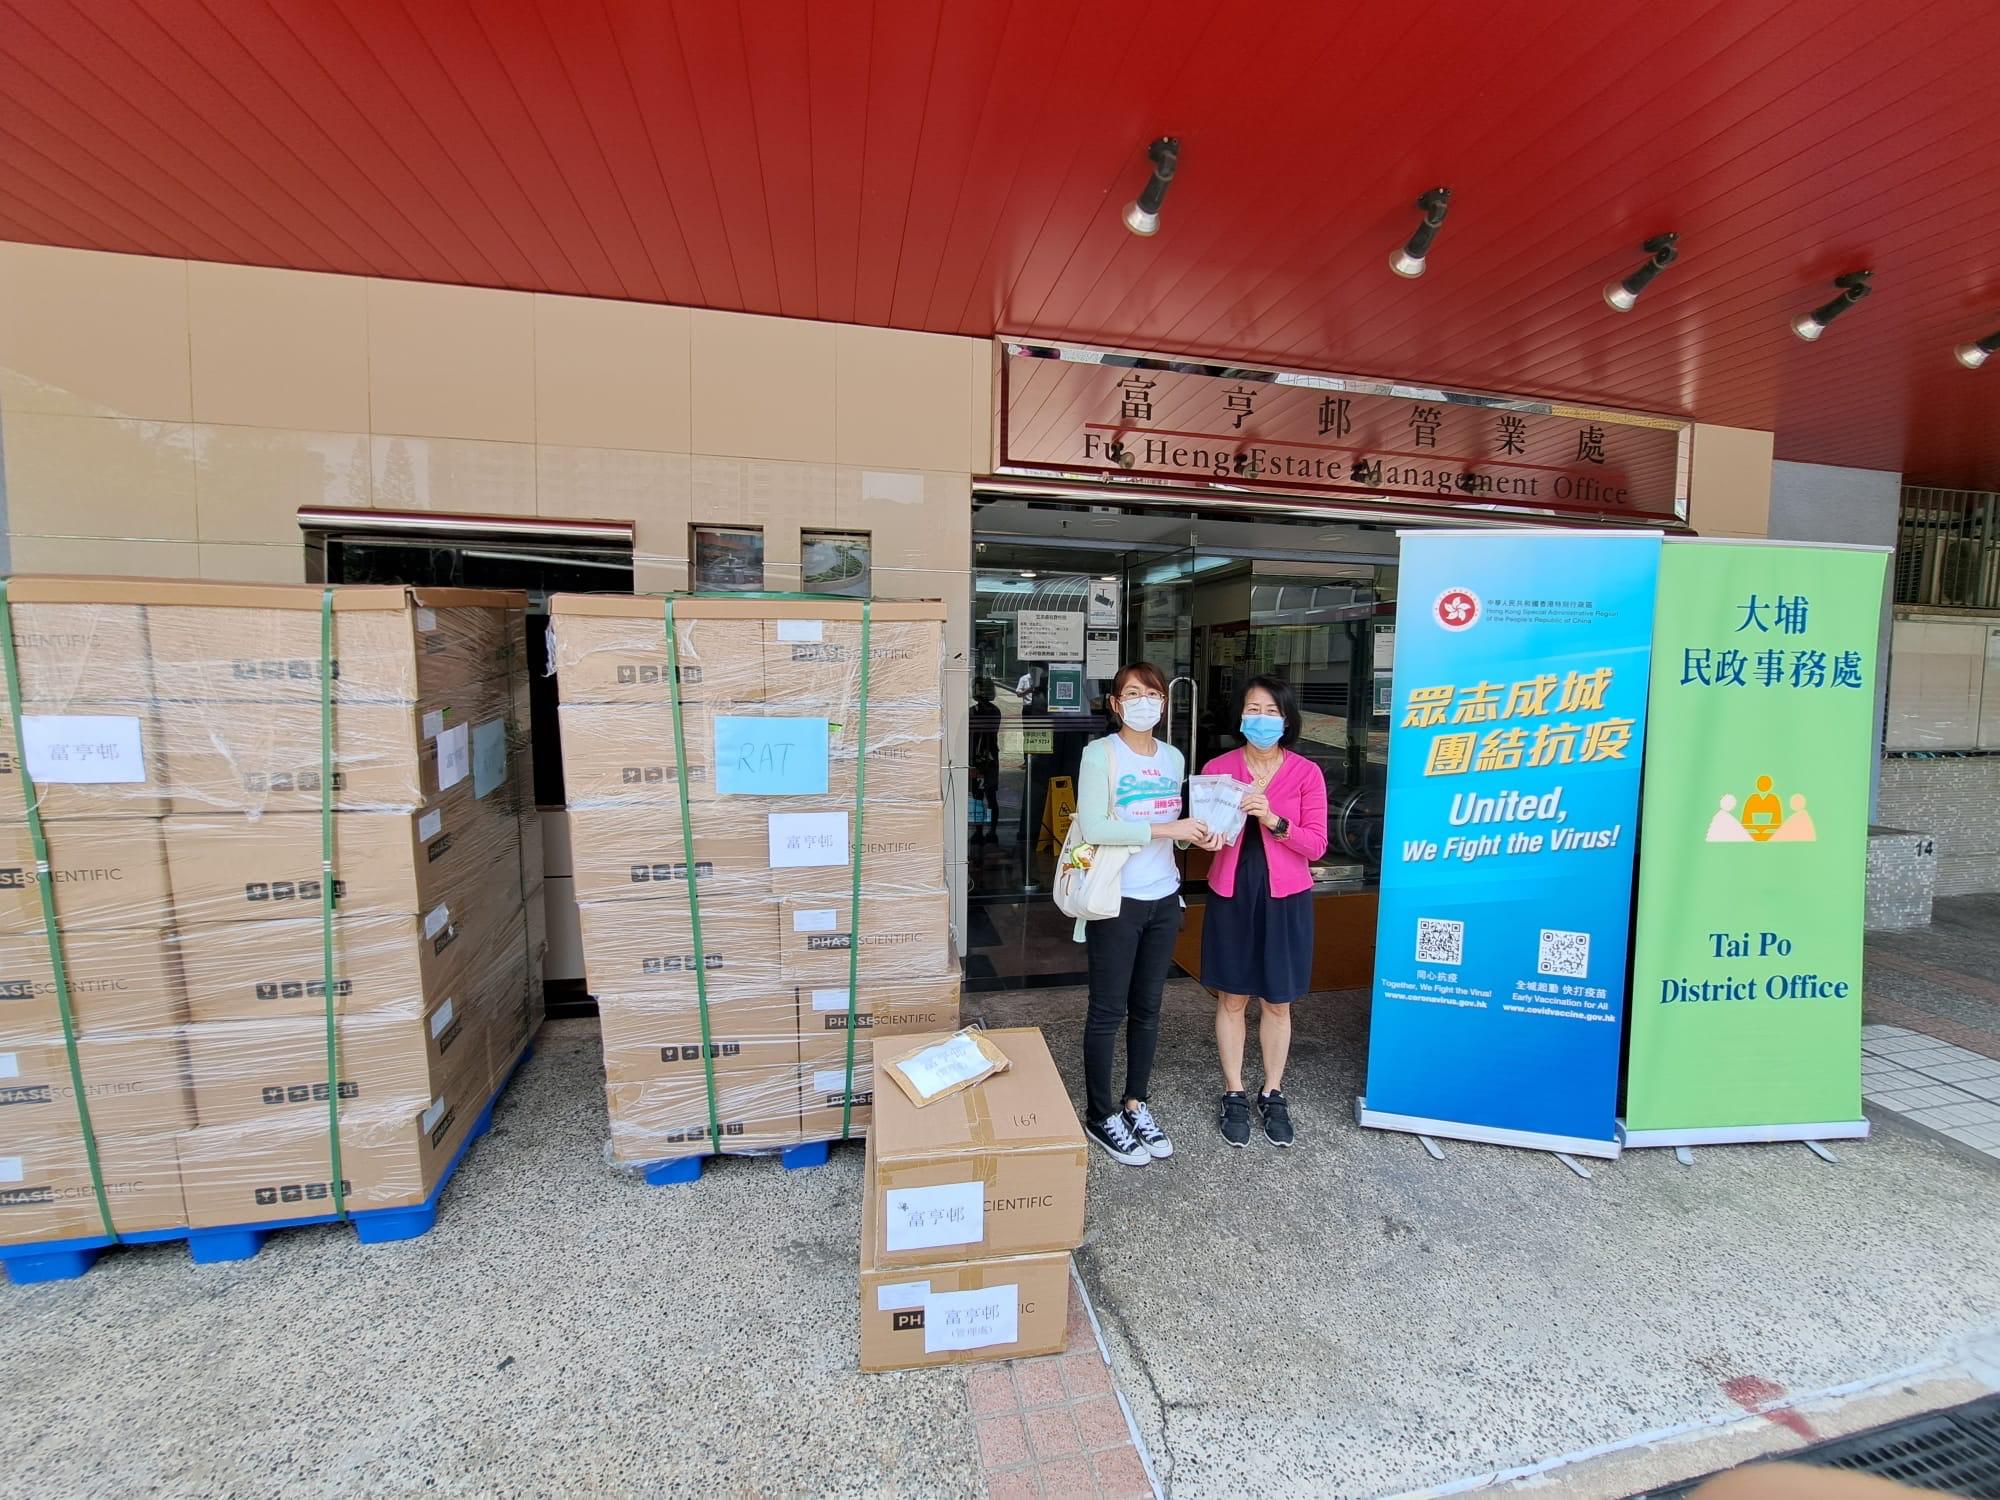 The Tai Po District Office today (May 5) distributed COVID-19 rapid test kits to households, cleansing workers and property management staff living and working in Fu Heng Estate for voluntary testing through the property management company.